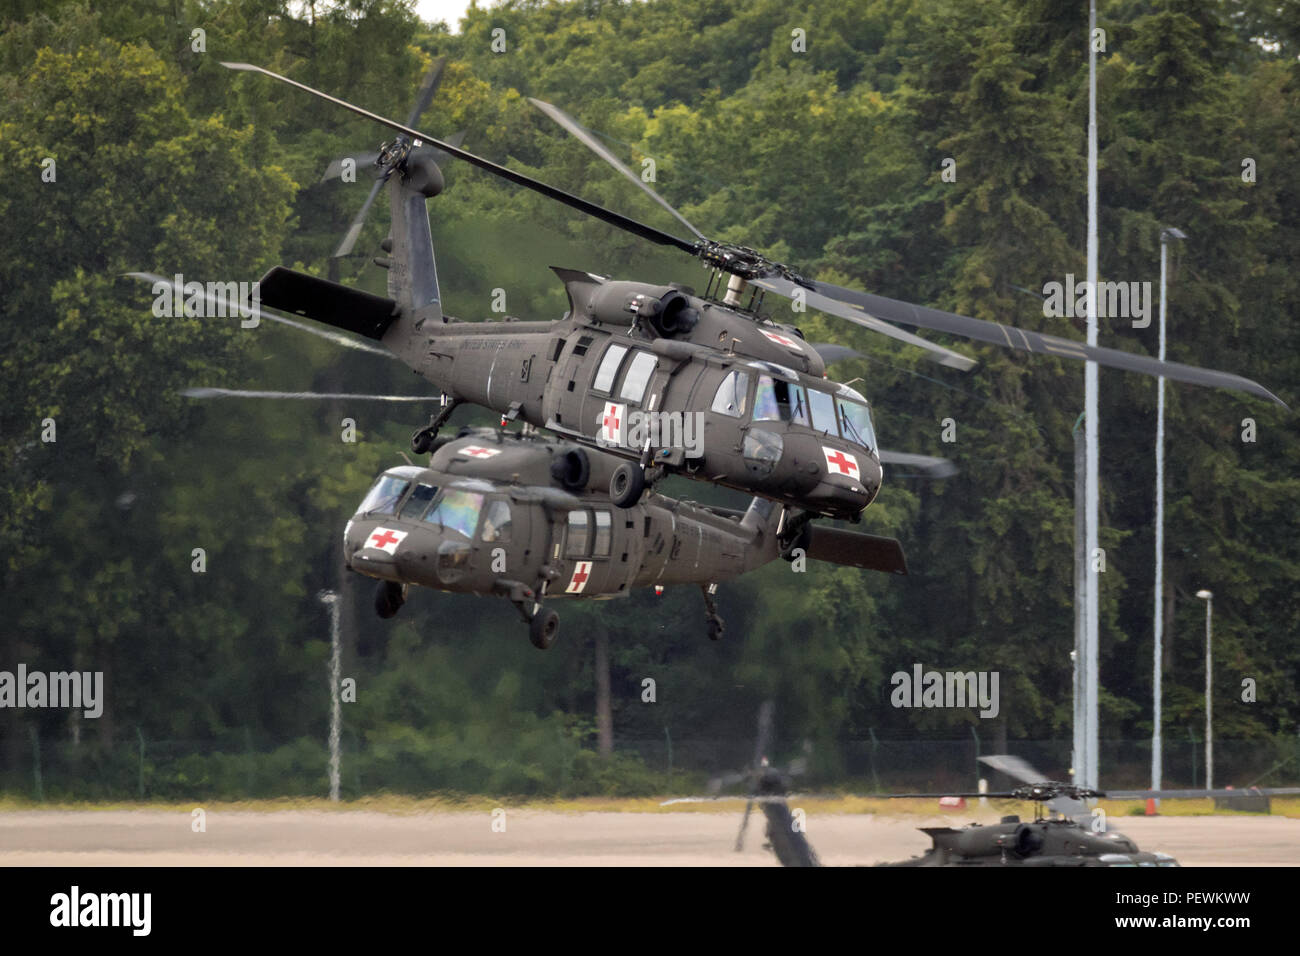 EINDHOVEN, THE NETHERLANDS - JUN 22, 2018: United States Army Sikorsky UH-60 Blackhawk transport helicopters taking off. Stock Photo